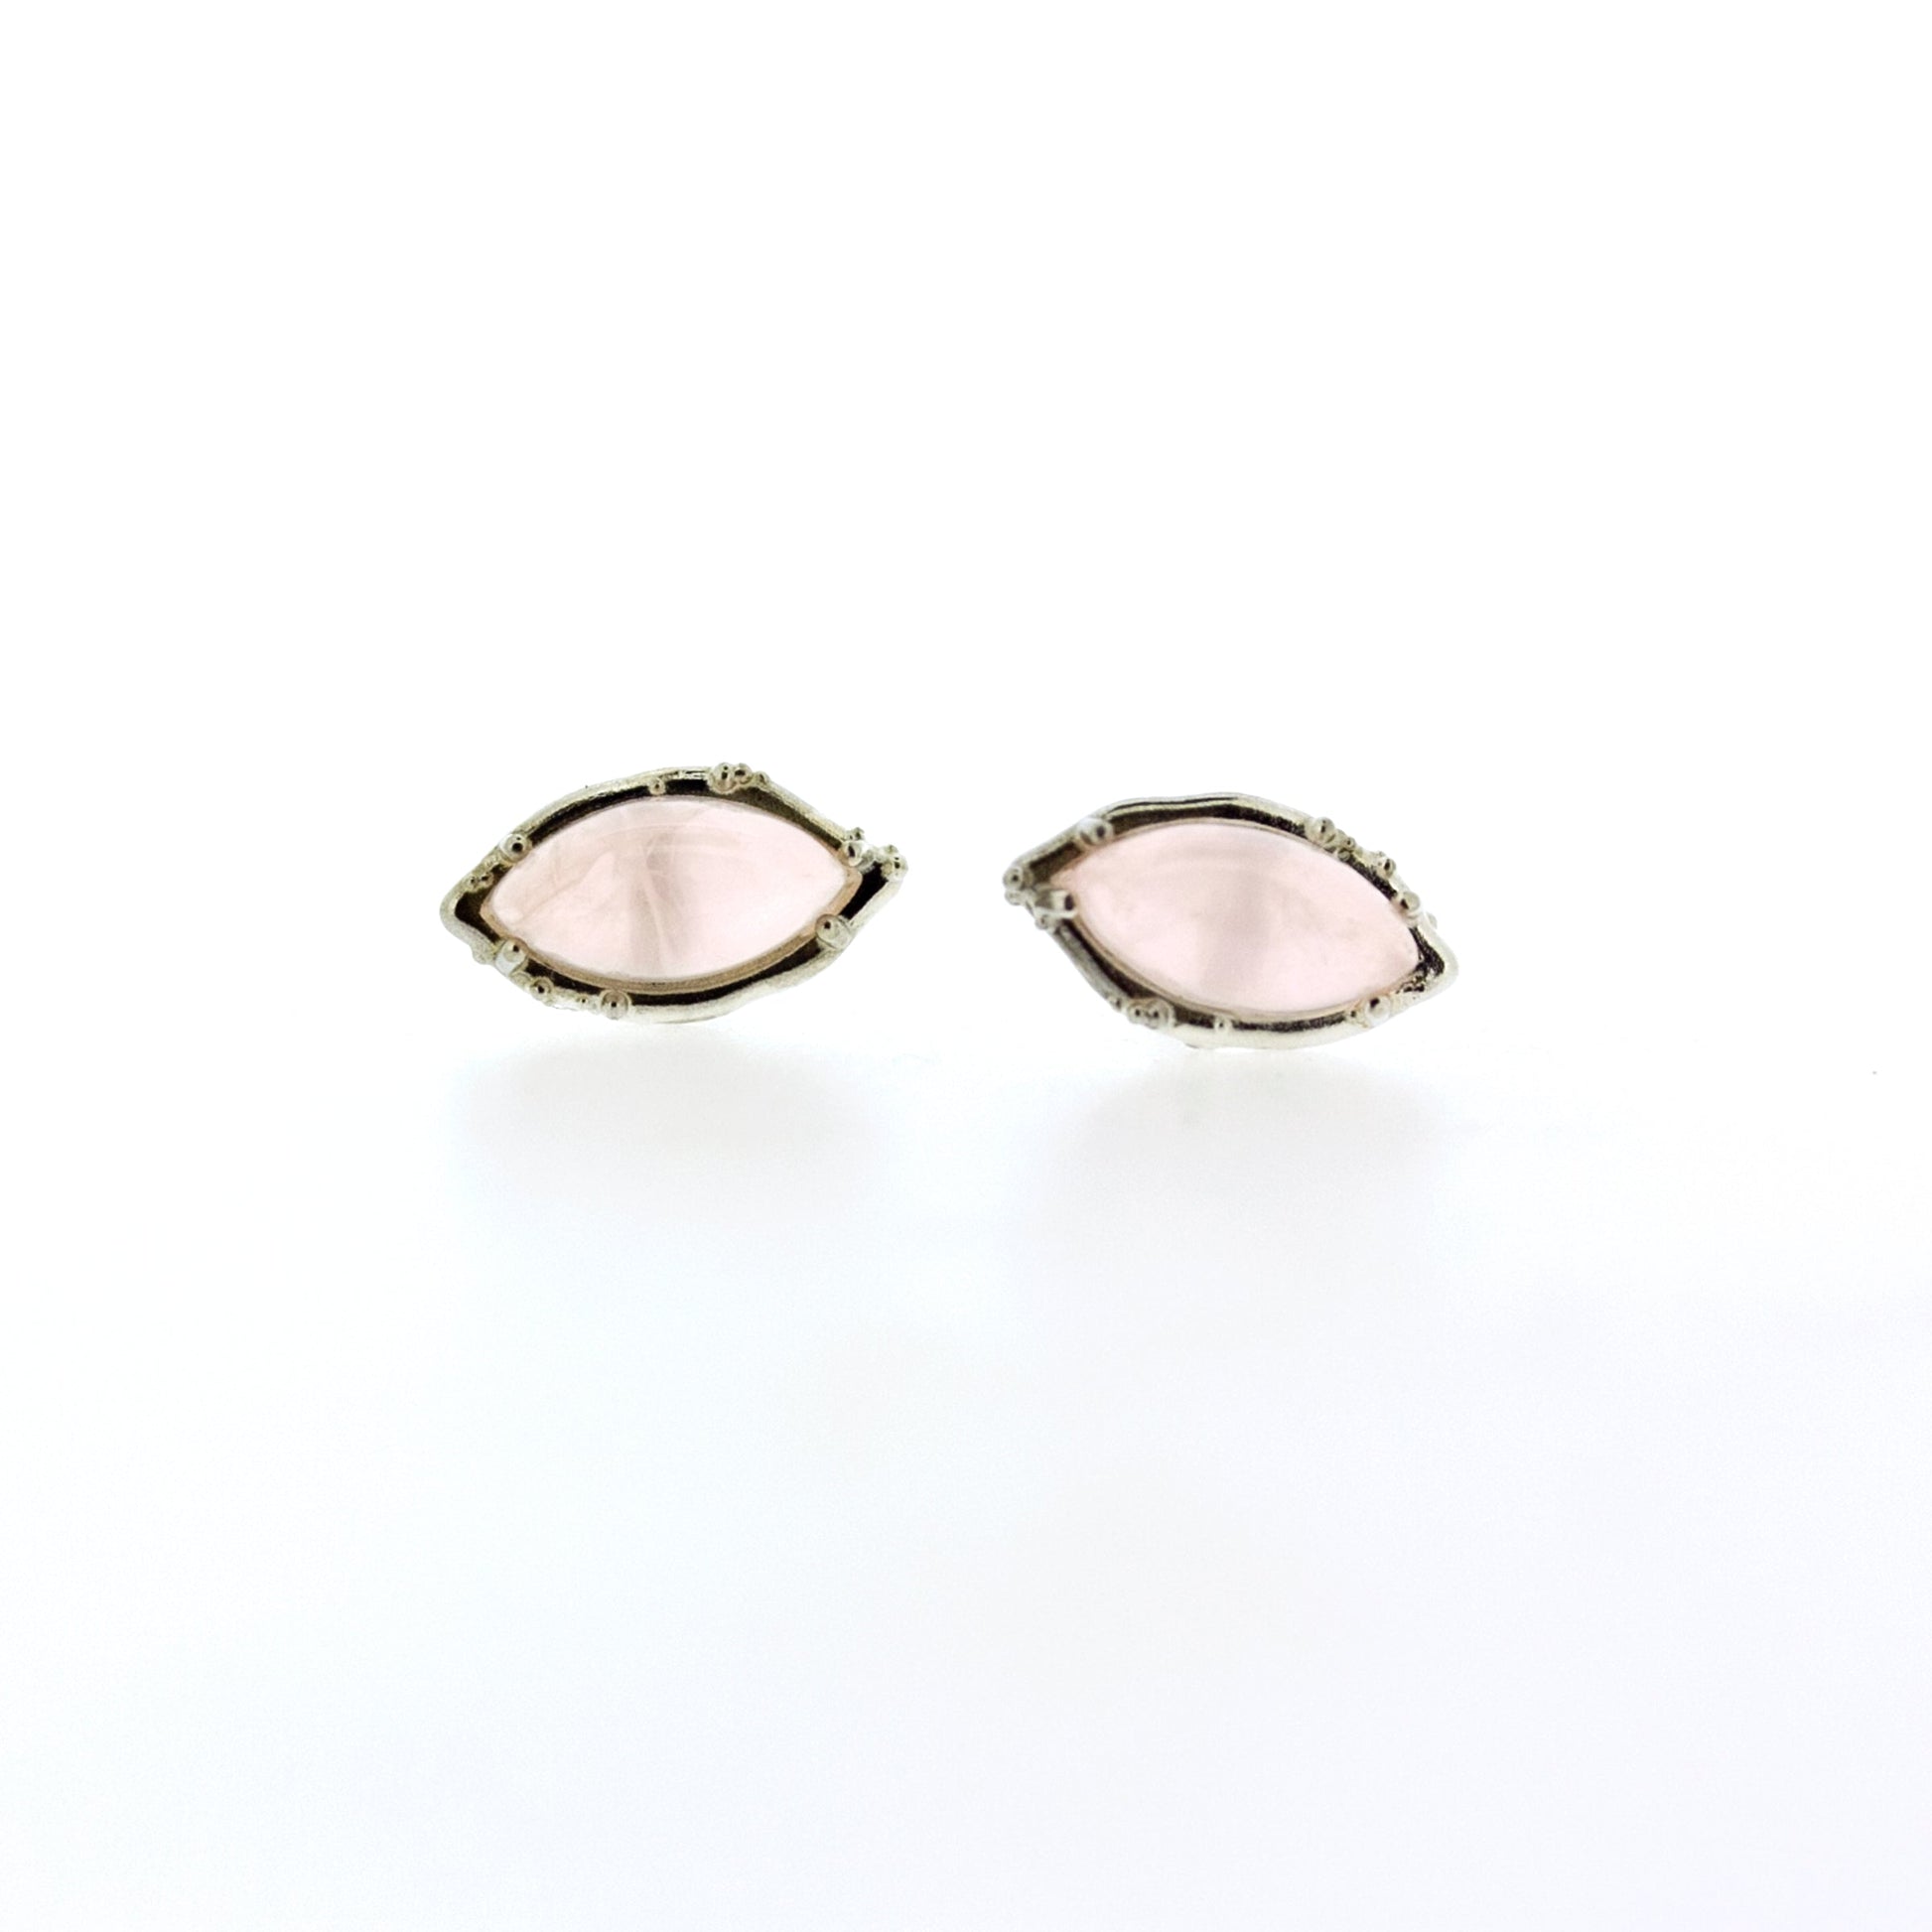 Full view of Rosa - Rose Quartz earrings. Sweet little Sterling silver marquise studs with semi-precious Rose Quartz cabochon gemstones. 